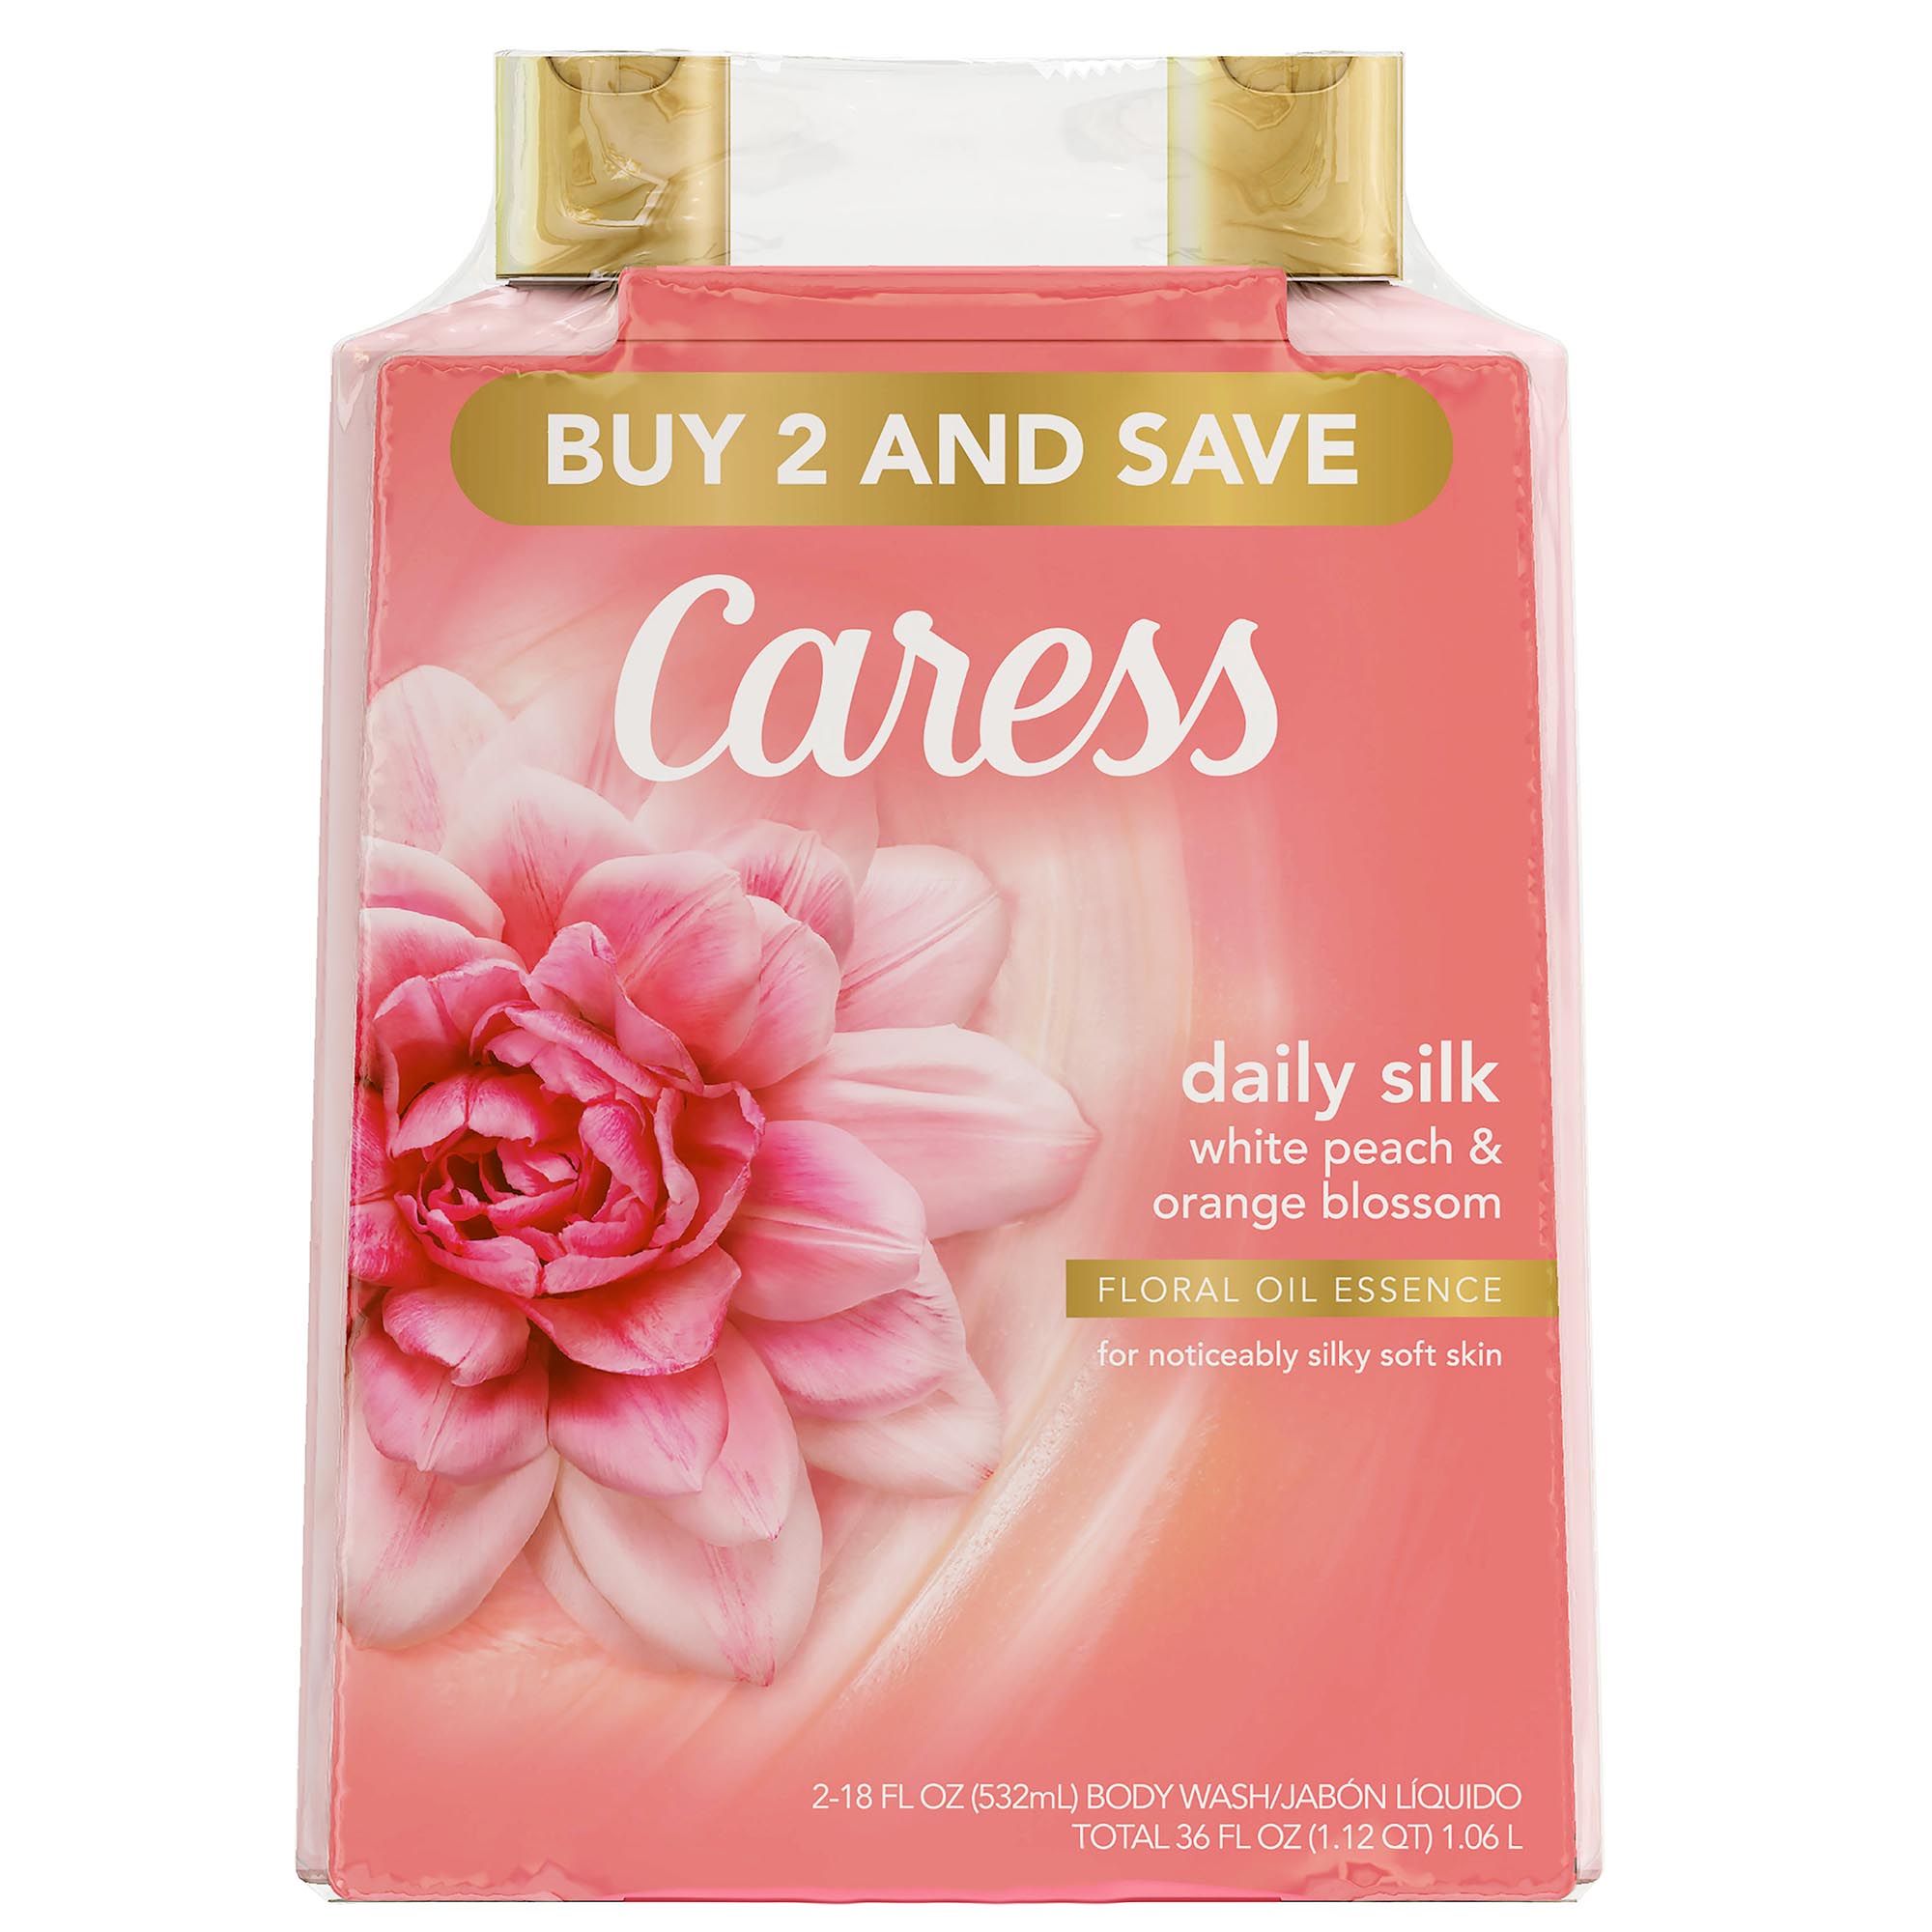 Caress Hydrating Body Wash Daily Silk 18 oz 2 Pack - image 1 of 9